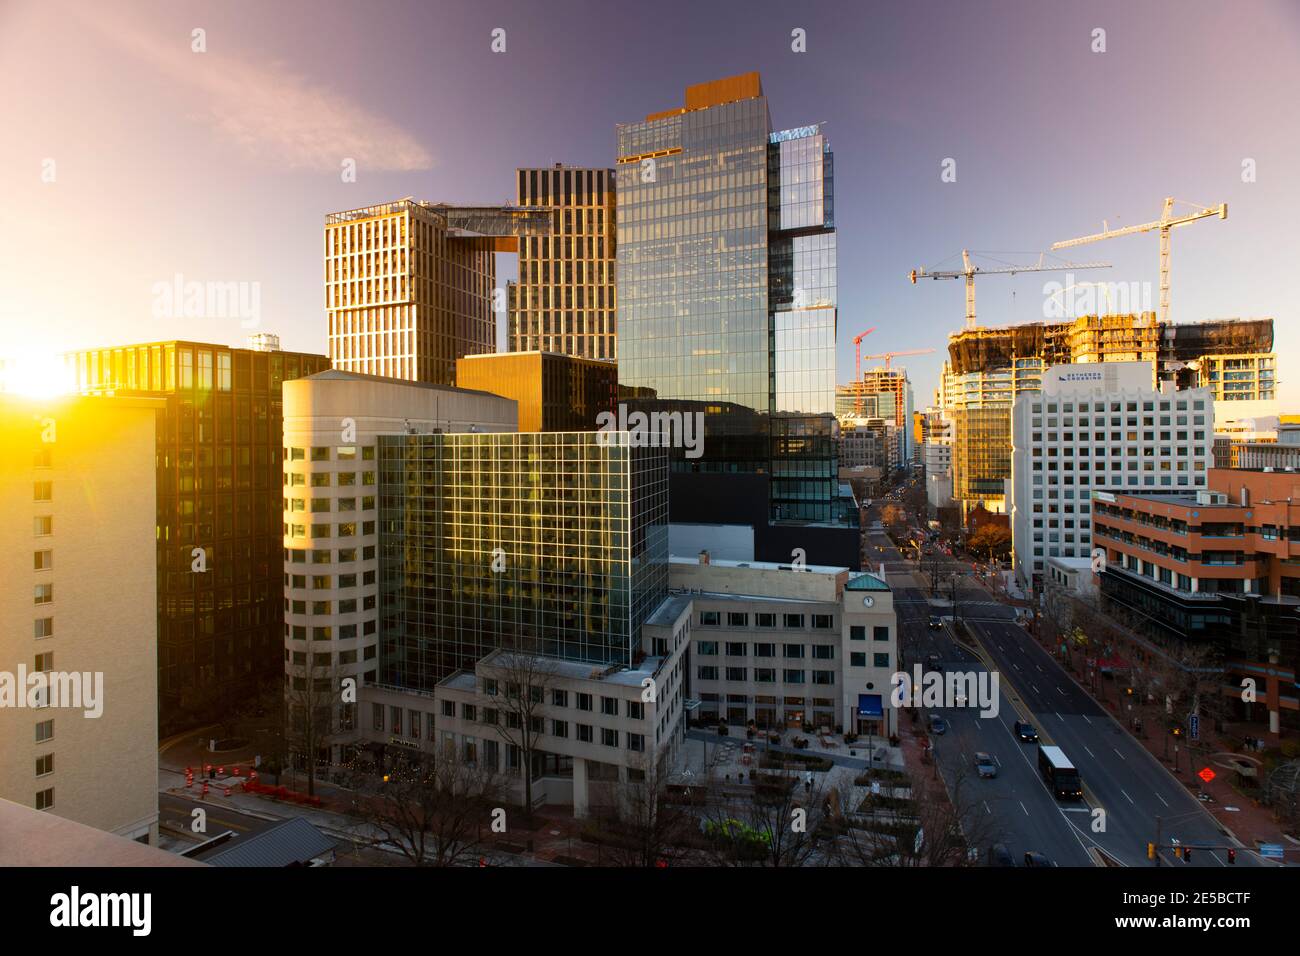 USA Maryland MD Bethesda skyline at evening with new construction of office and residential buildings Stock Photo